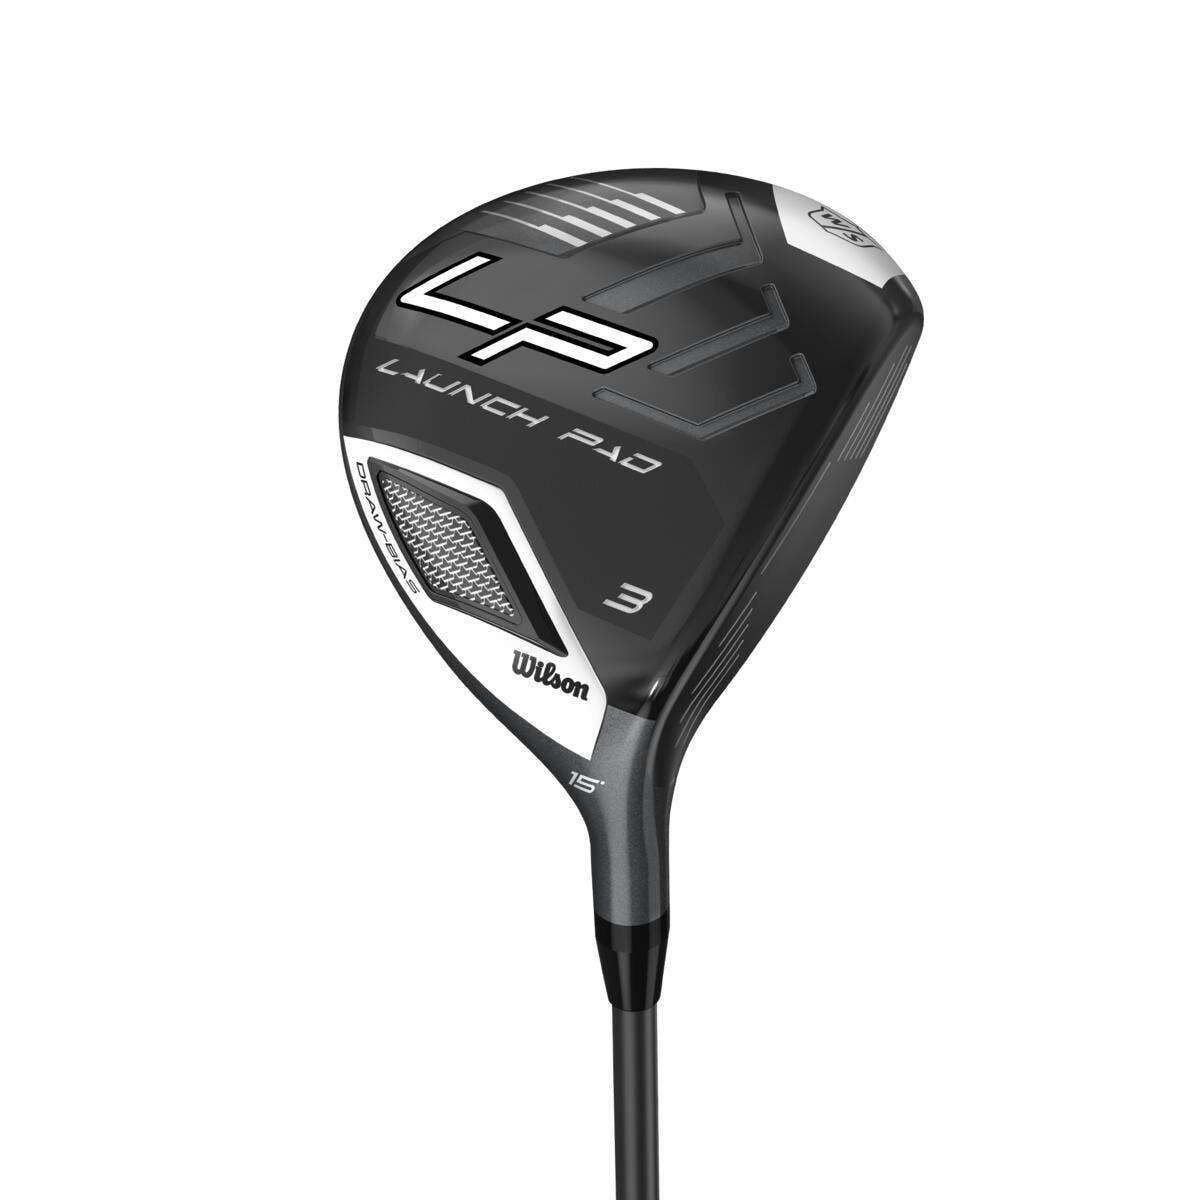 Wilson Launch Pad Fairway Wood | Curated.com